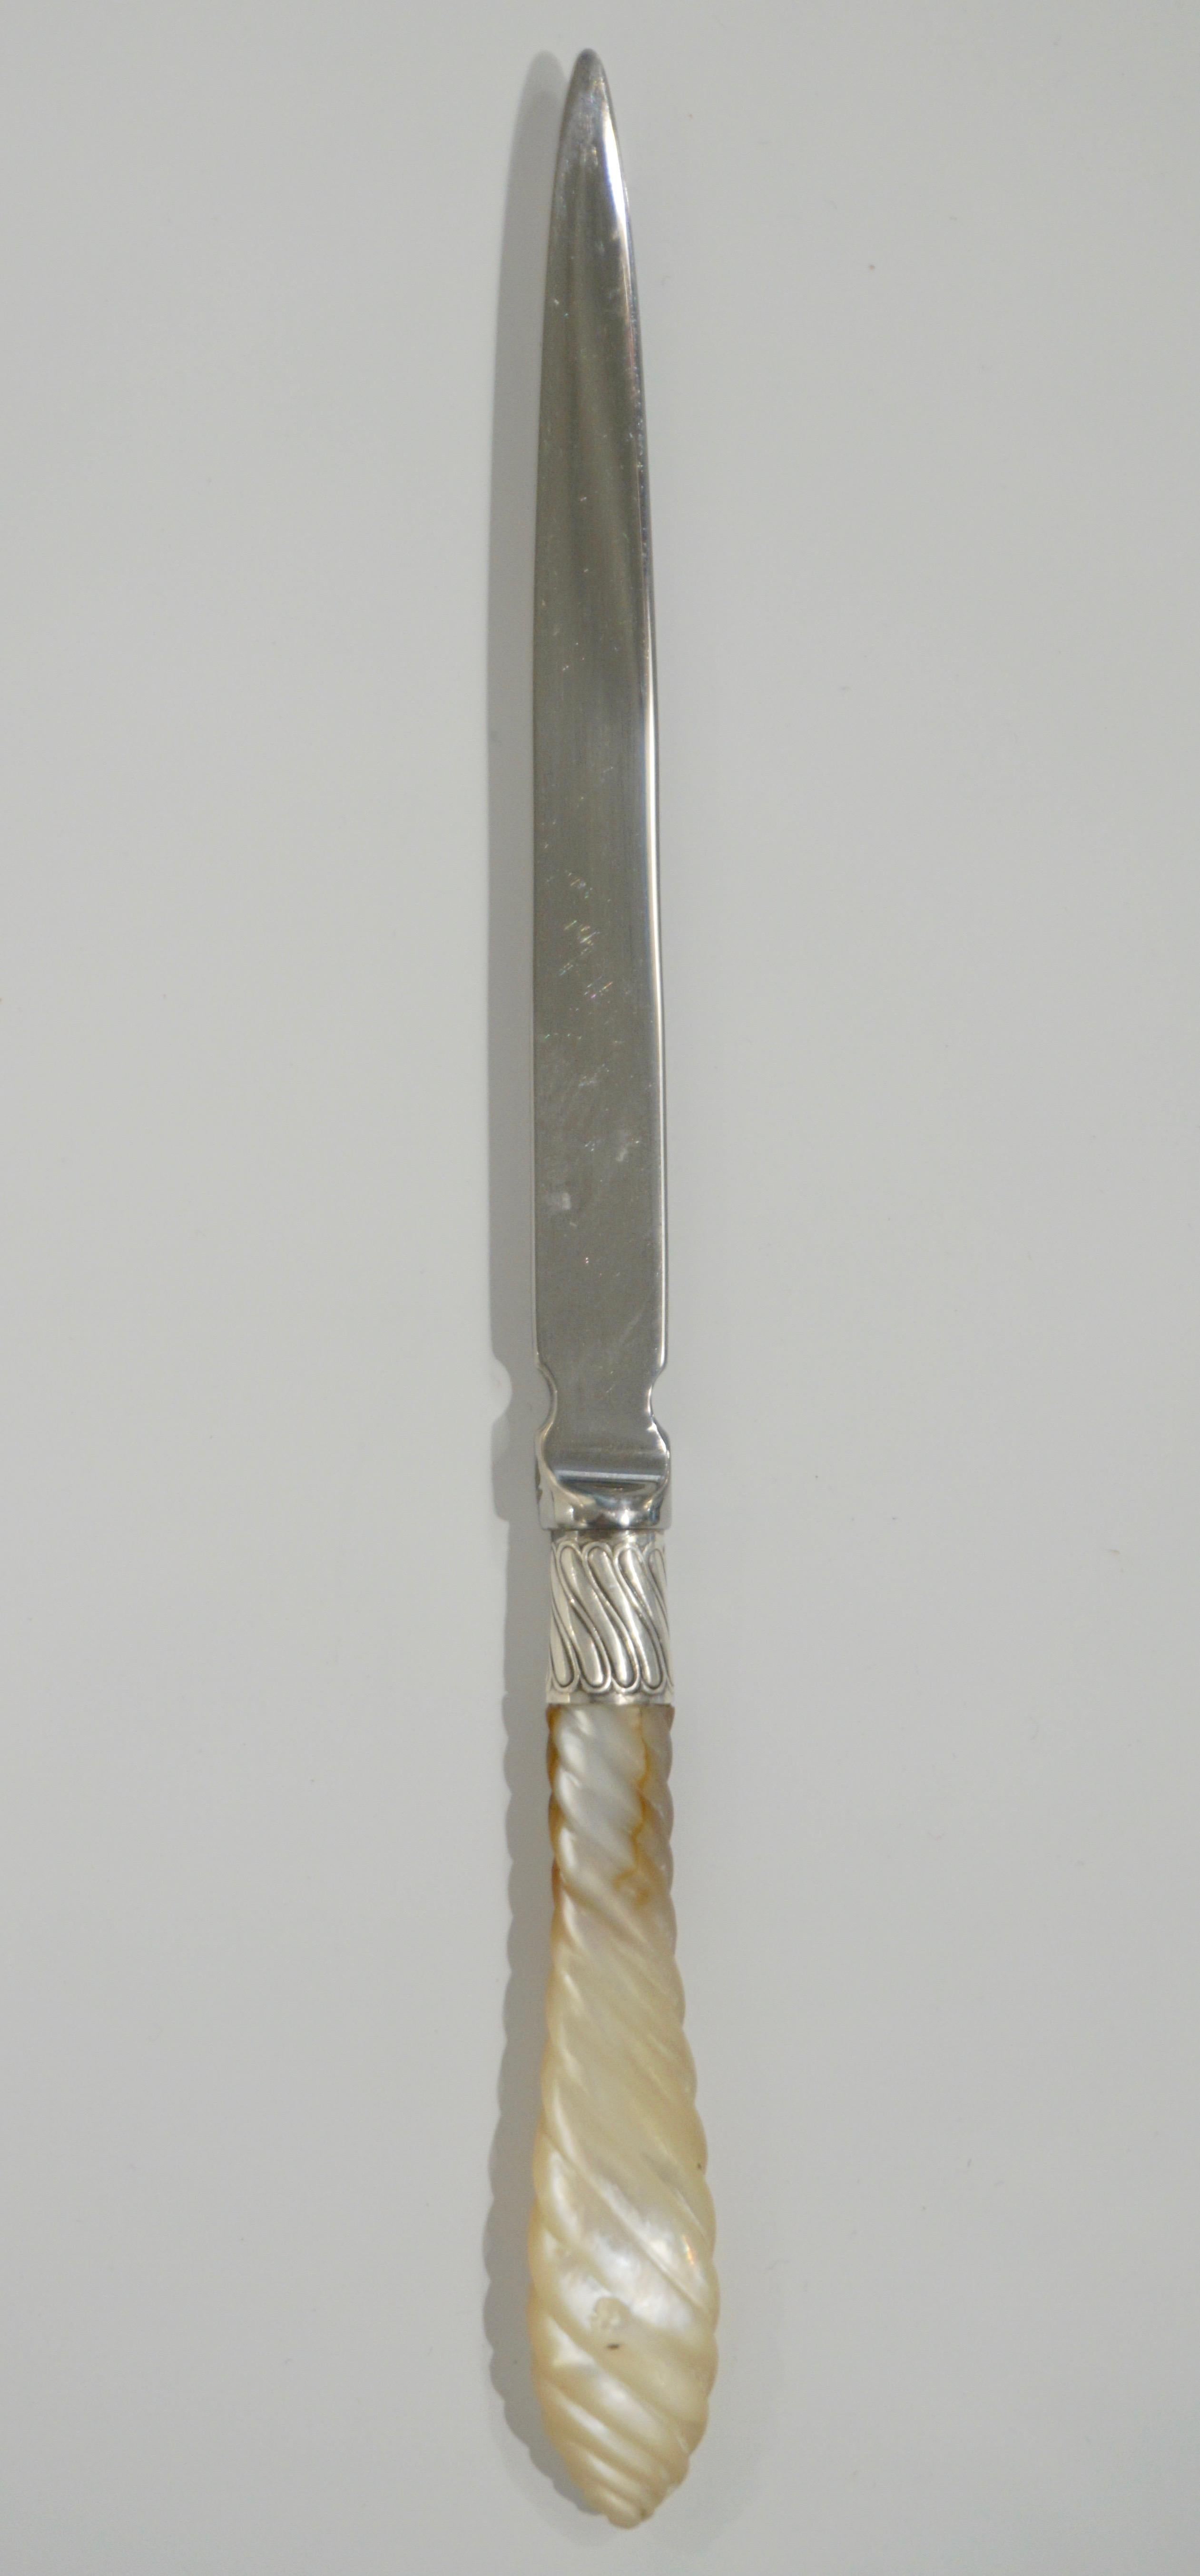 Stainless Steel 1970s English Magnifying Glass and Letter Opener with Mother of Pearl Handles